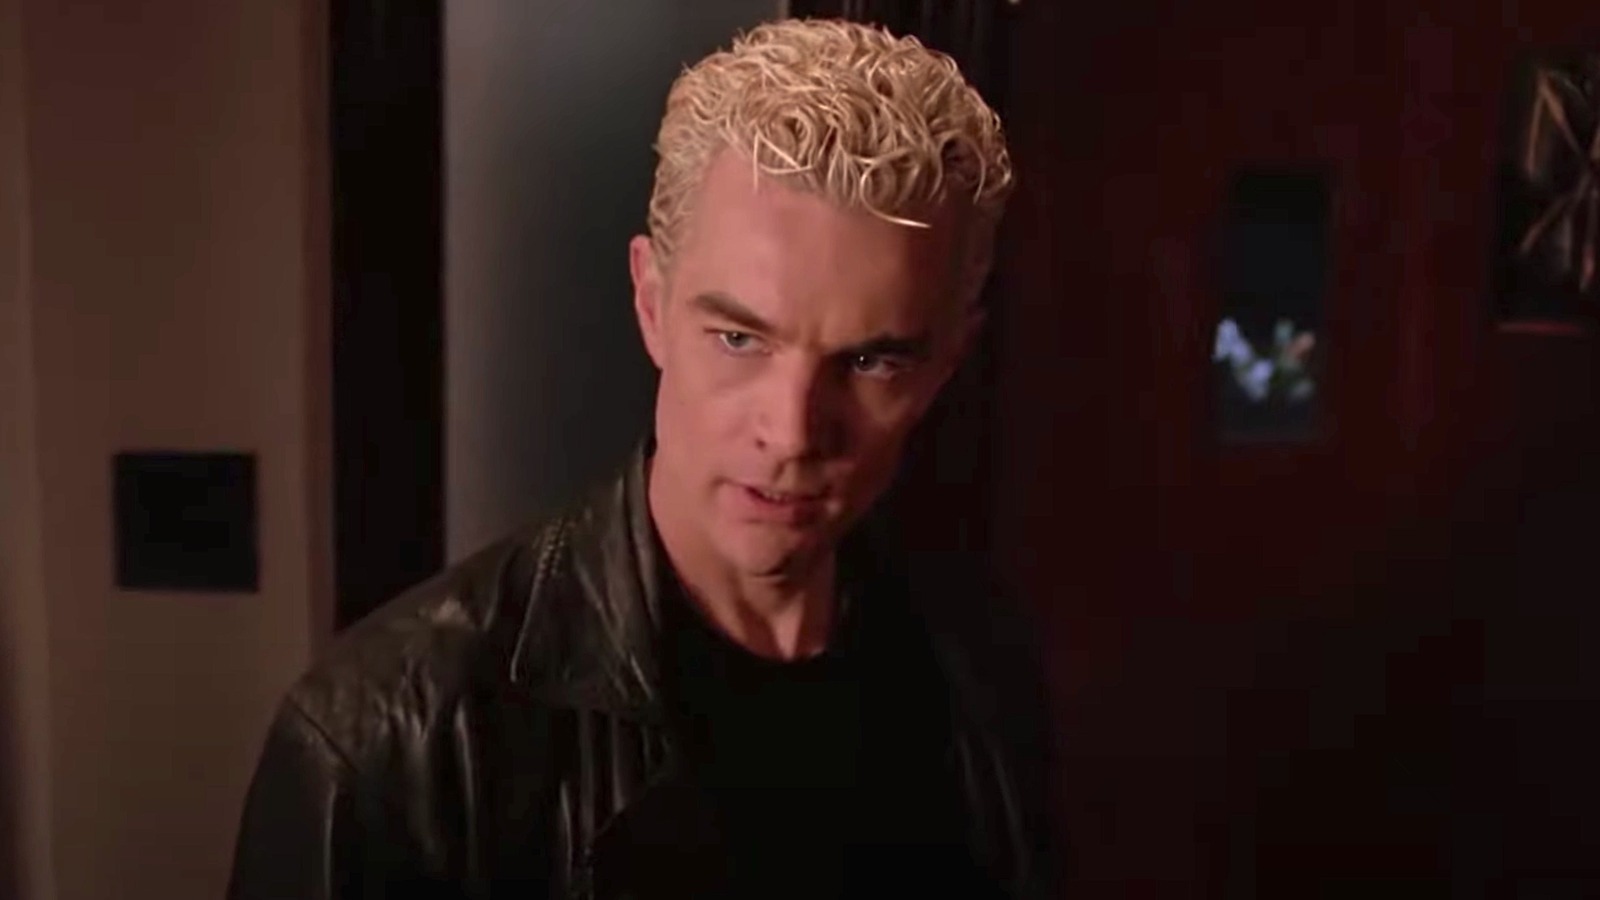 How Buffy's James Marsters Made Sure Spike Wasn't Killed Off